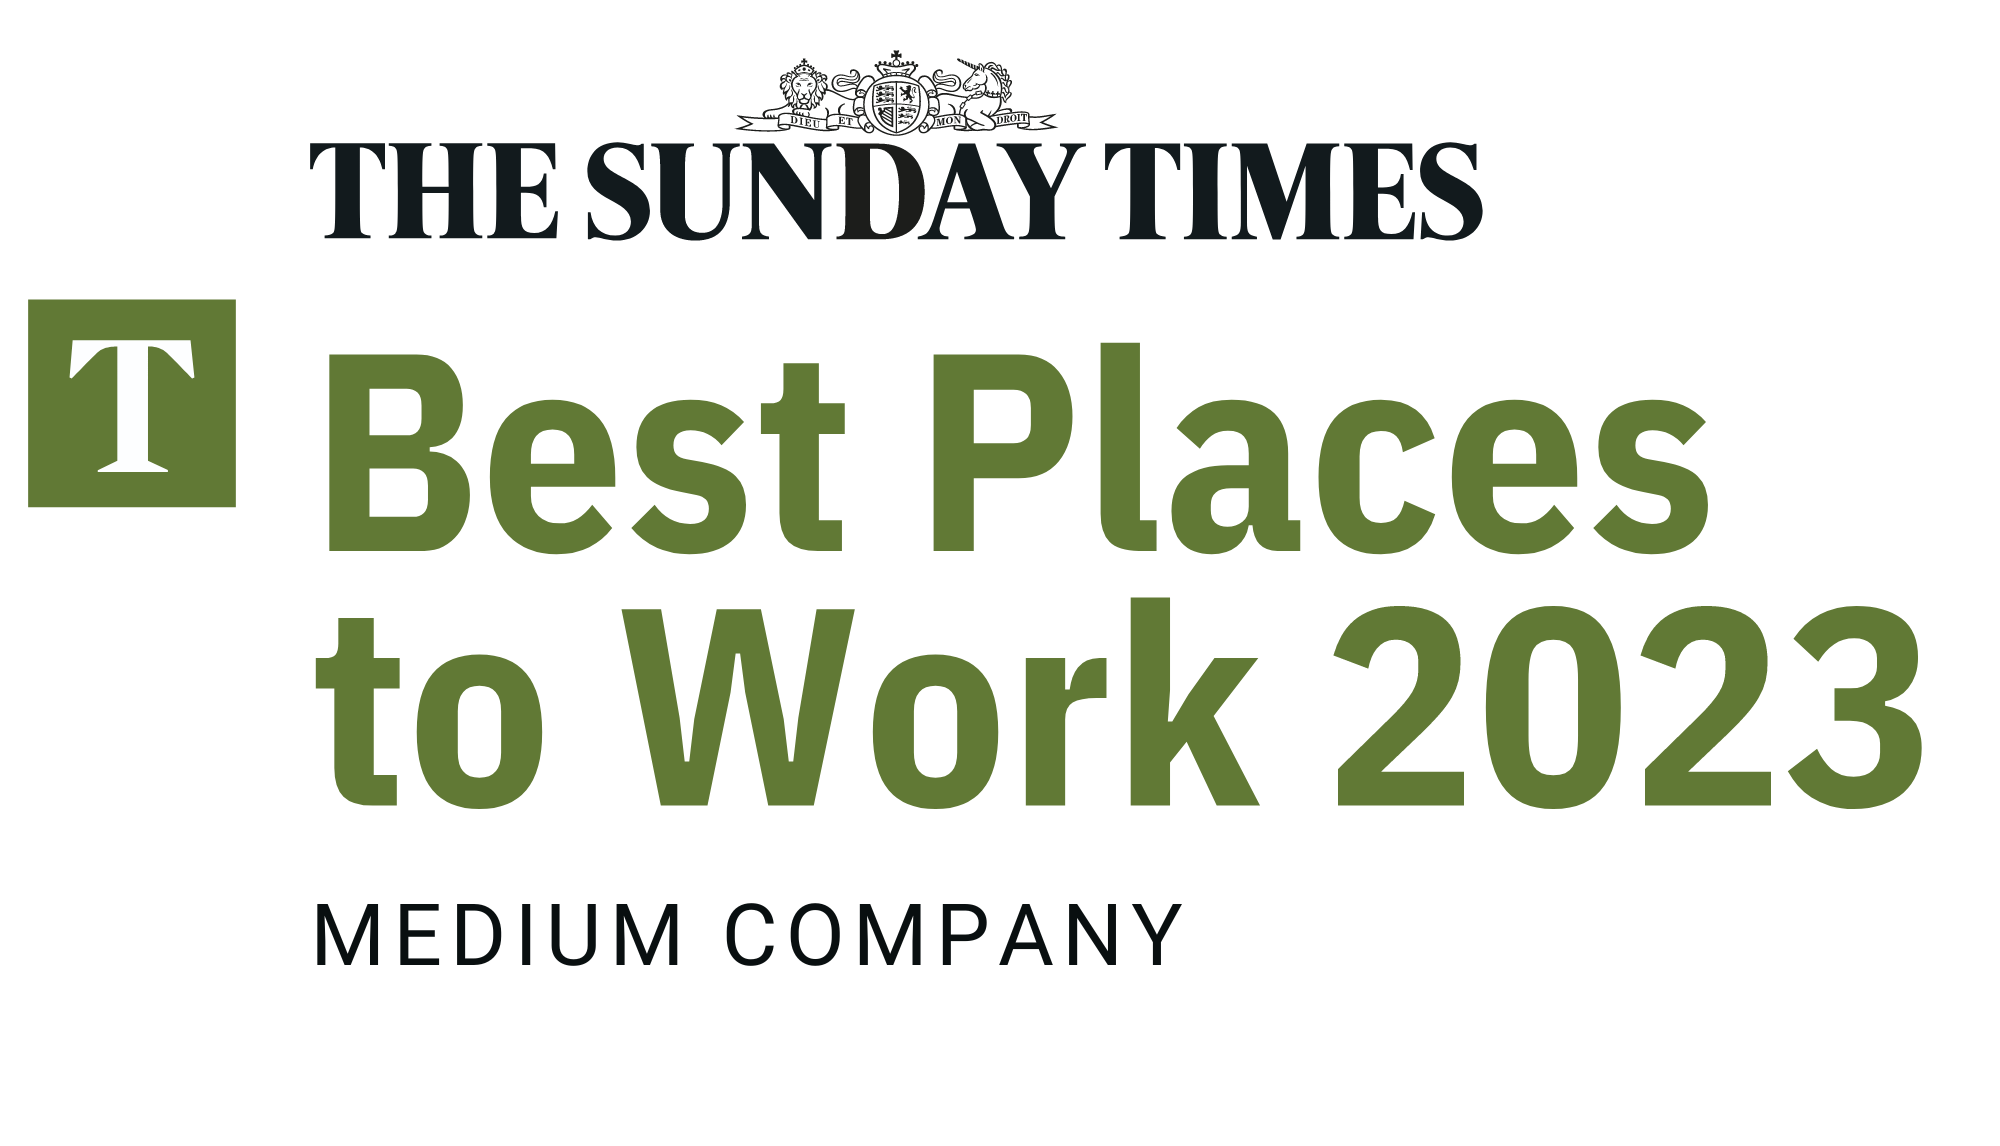 Ancoris Recognised as Top Place to Work and Launches Training & Enablement Services to Help Customers Meet Cloud Skills Demands